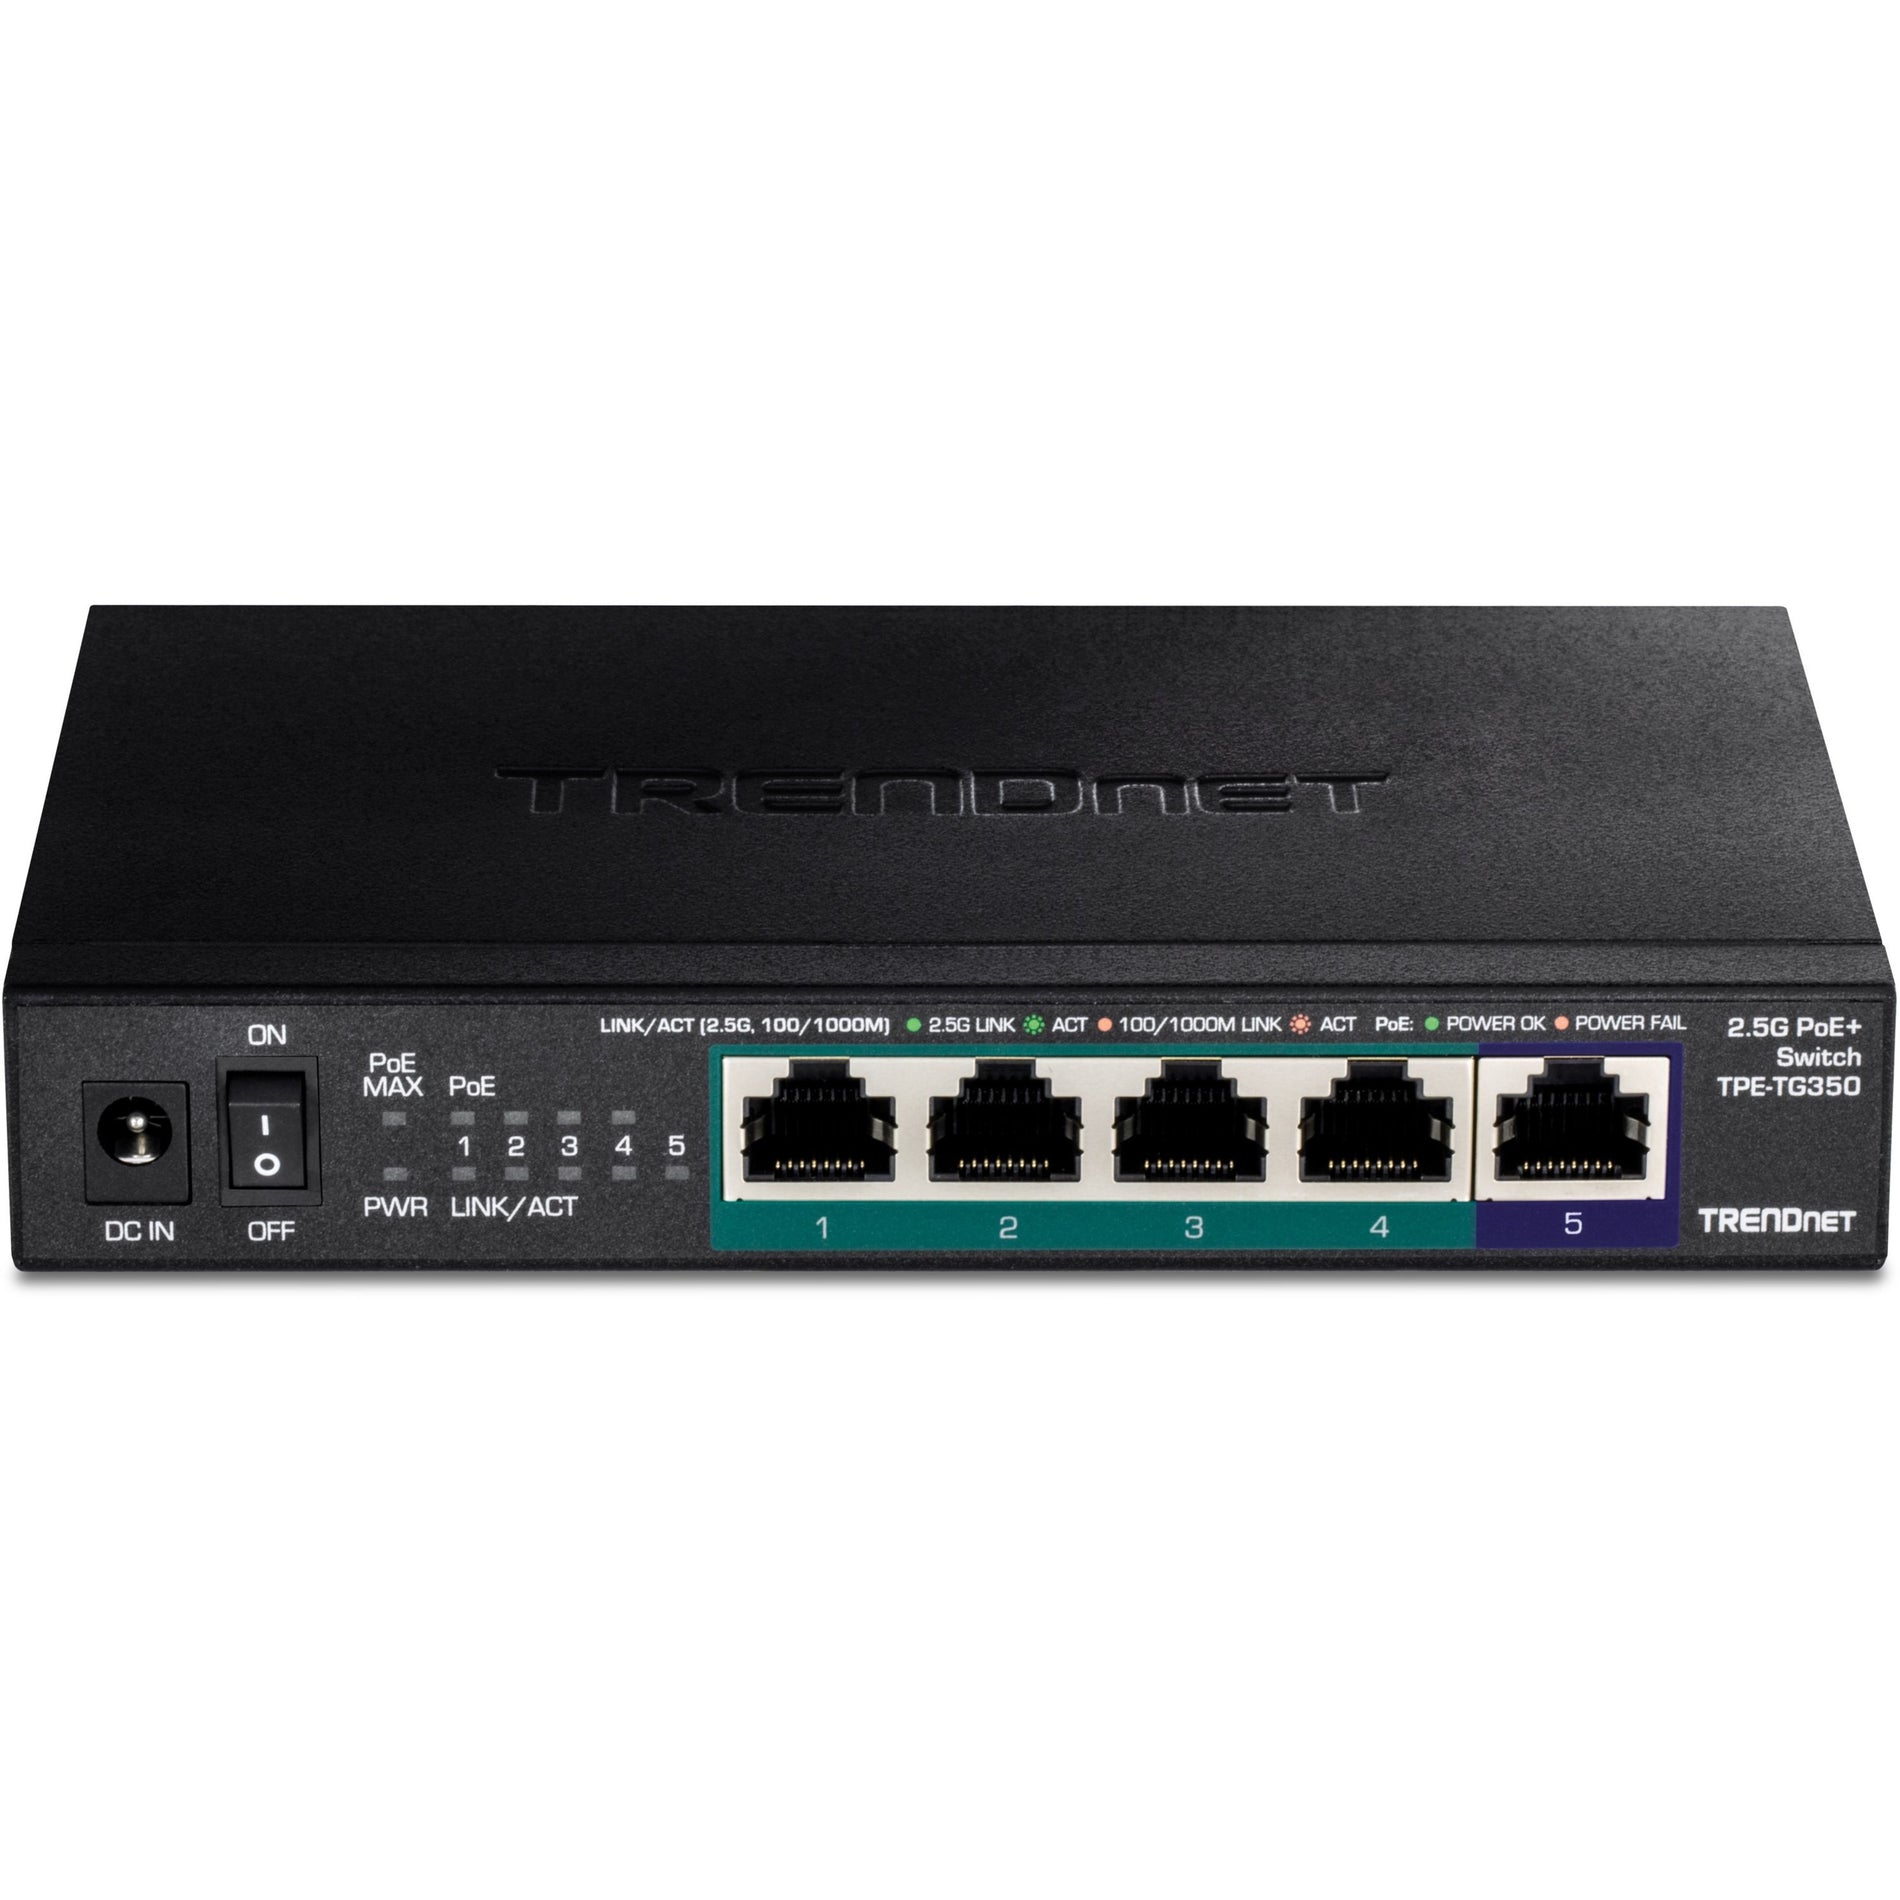 TRENDnet 5-Port Unmanaged 2.5G PoE+ Switch, Fanless, Compact Desktop Design, Metal Housing, 2.5GBASE-T Ports, IEEE 802.3bz, 55W PoE Budget, Life protection, Black, TPE-TG350 (TPE-TG350) Front image